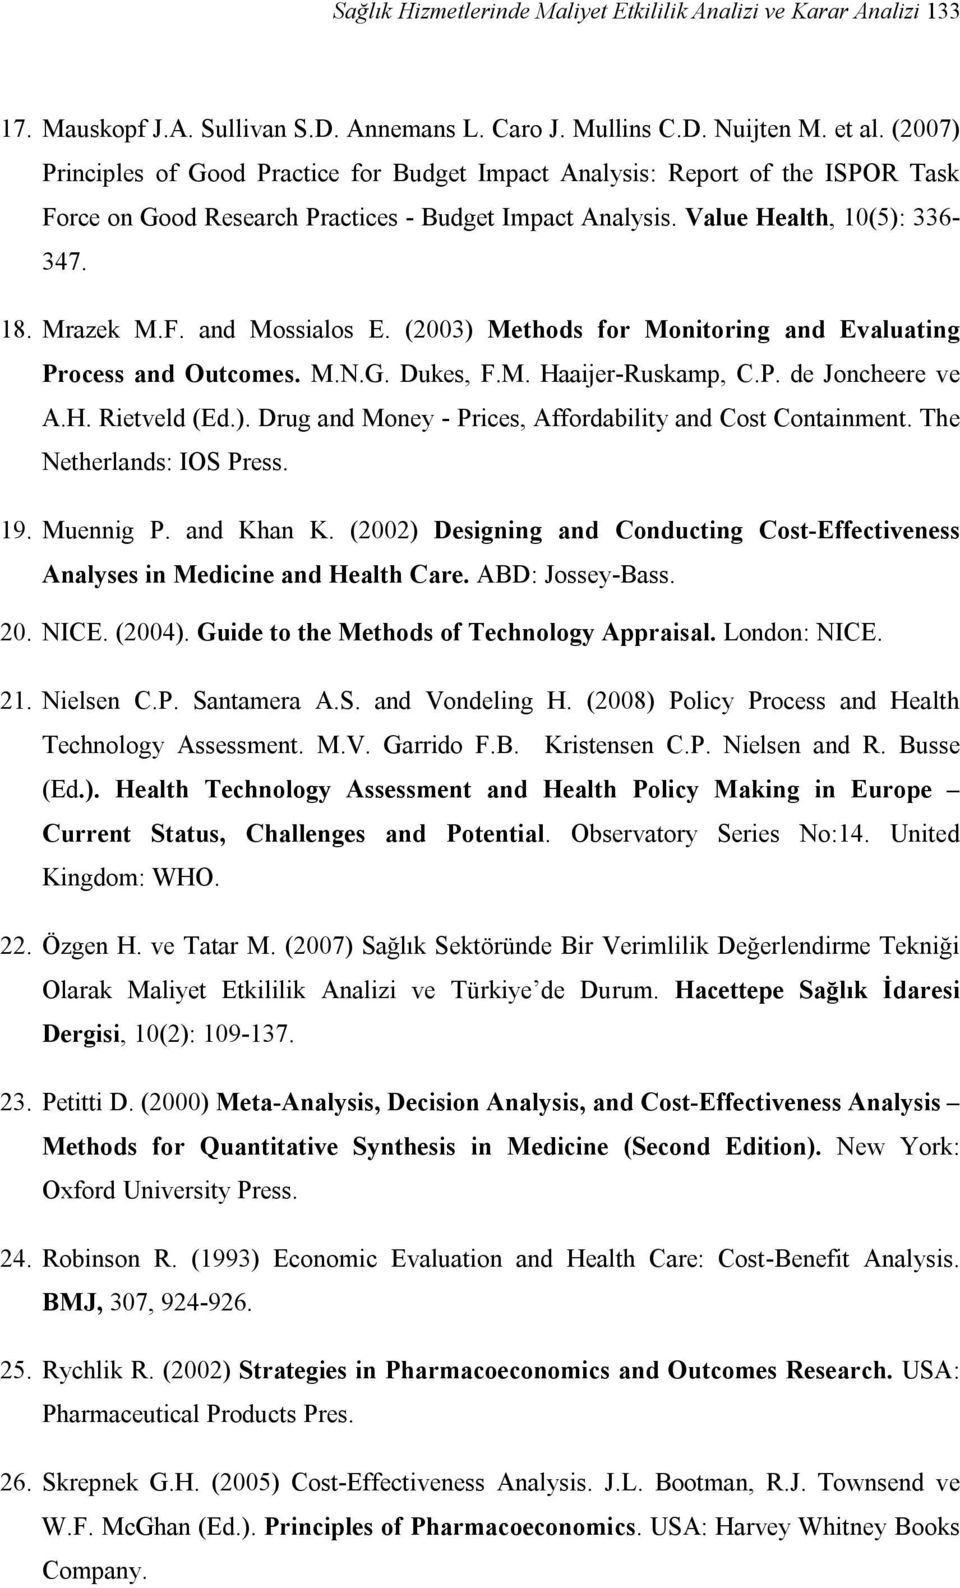 (2003) Methods for Monitoring and Evaluating Process and Outcomes. M.N.G. Dukes, F.M. Haaijer-Ruskamp, C.P. de Joncheere ve A.H. Rietveld (Ed.). Drug and Money - Prices, Affordability and Cost Containment.